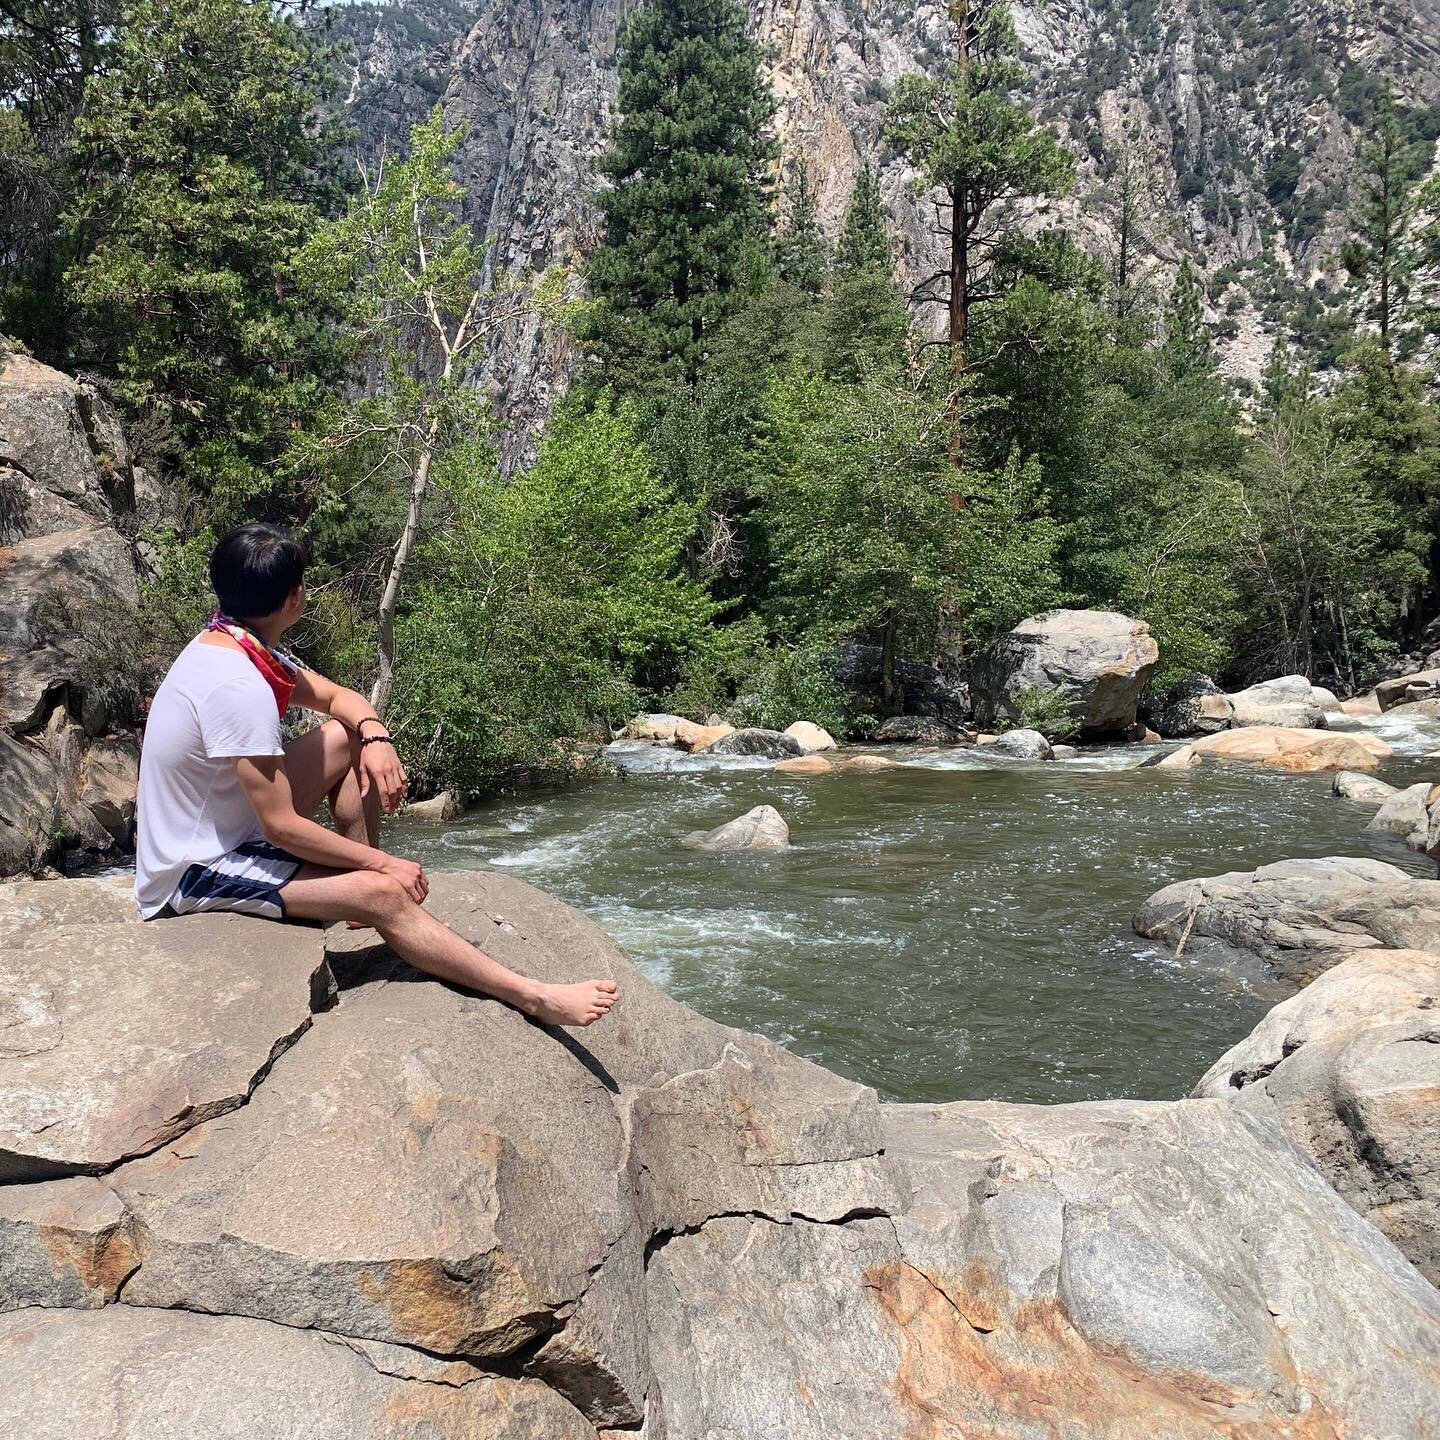 I sit by myself, talking to the tree-ee-ees!

#travel #outdooradventures #hiking #nature #naturelover #romanticizeyourlife #kingscanyonnationalpark #rivers